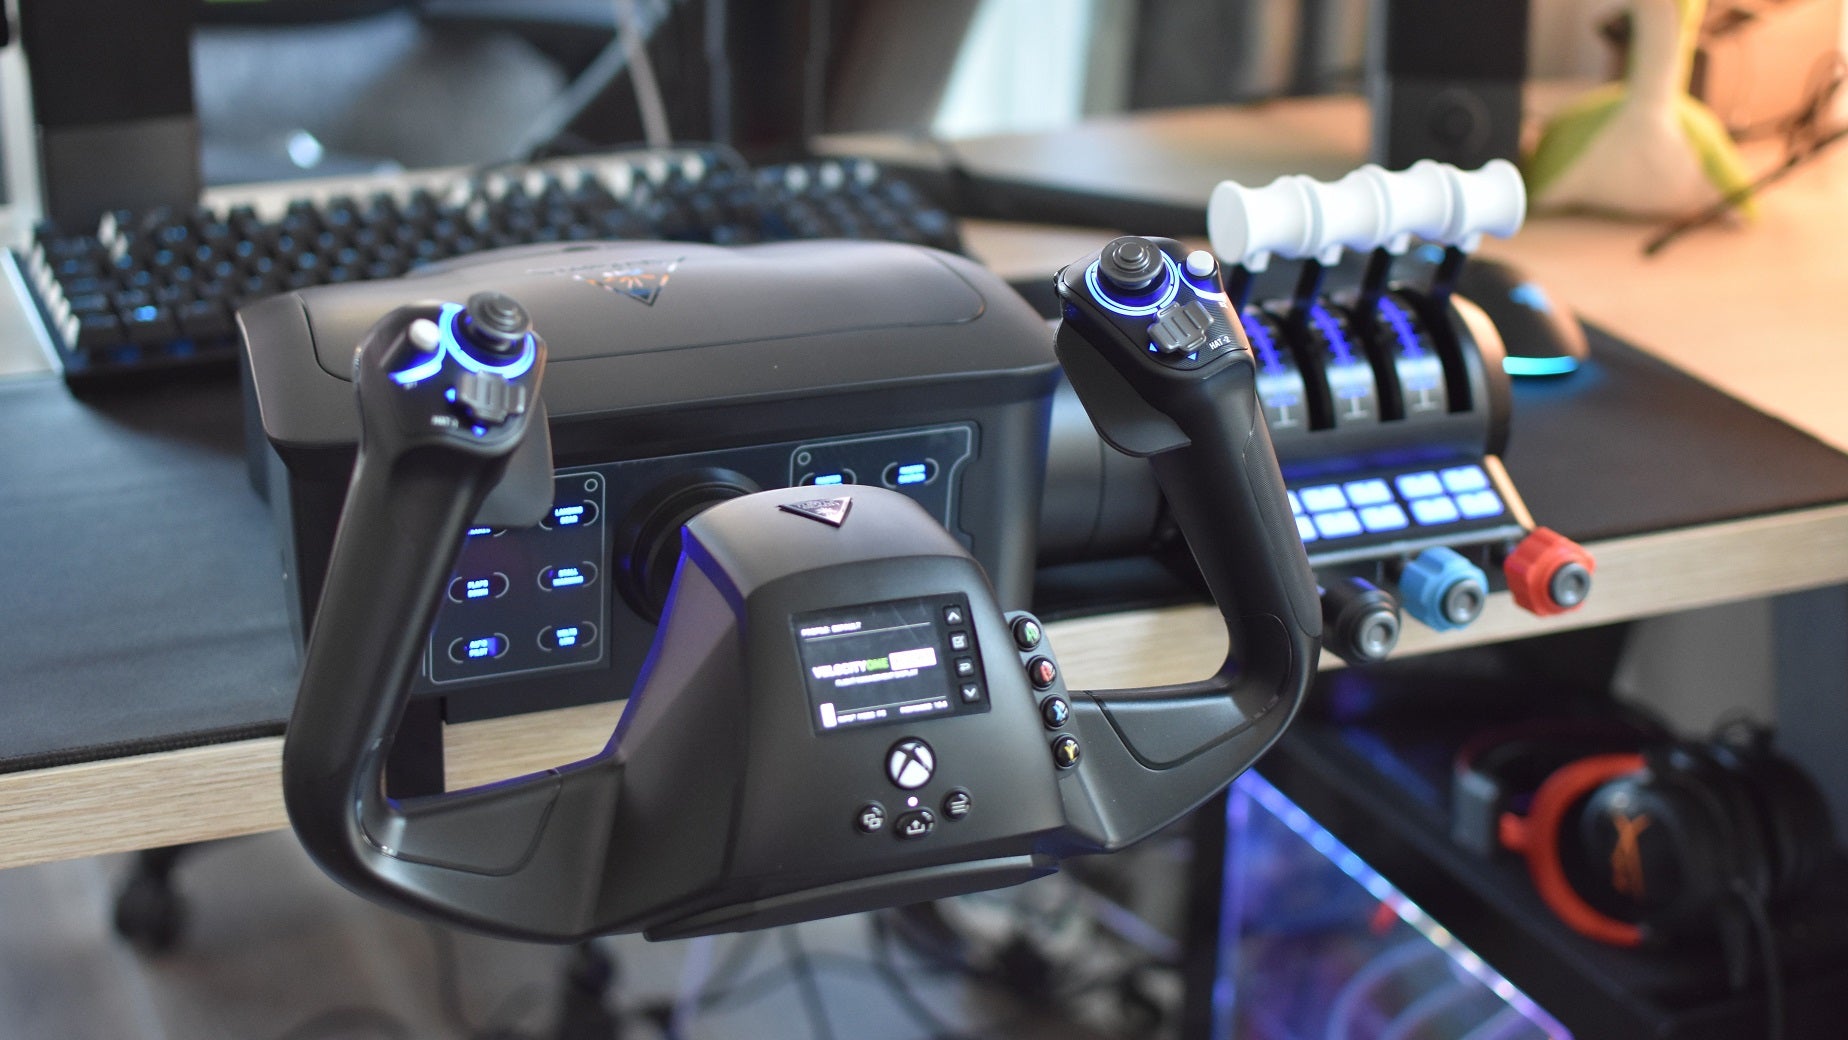 game The Turtle Beach VelocityOne Flight yoke controller, powered up and affixed to a desk.